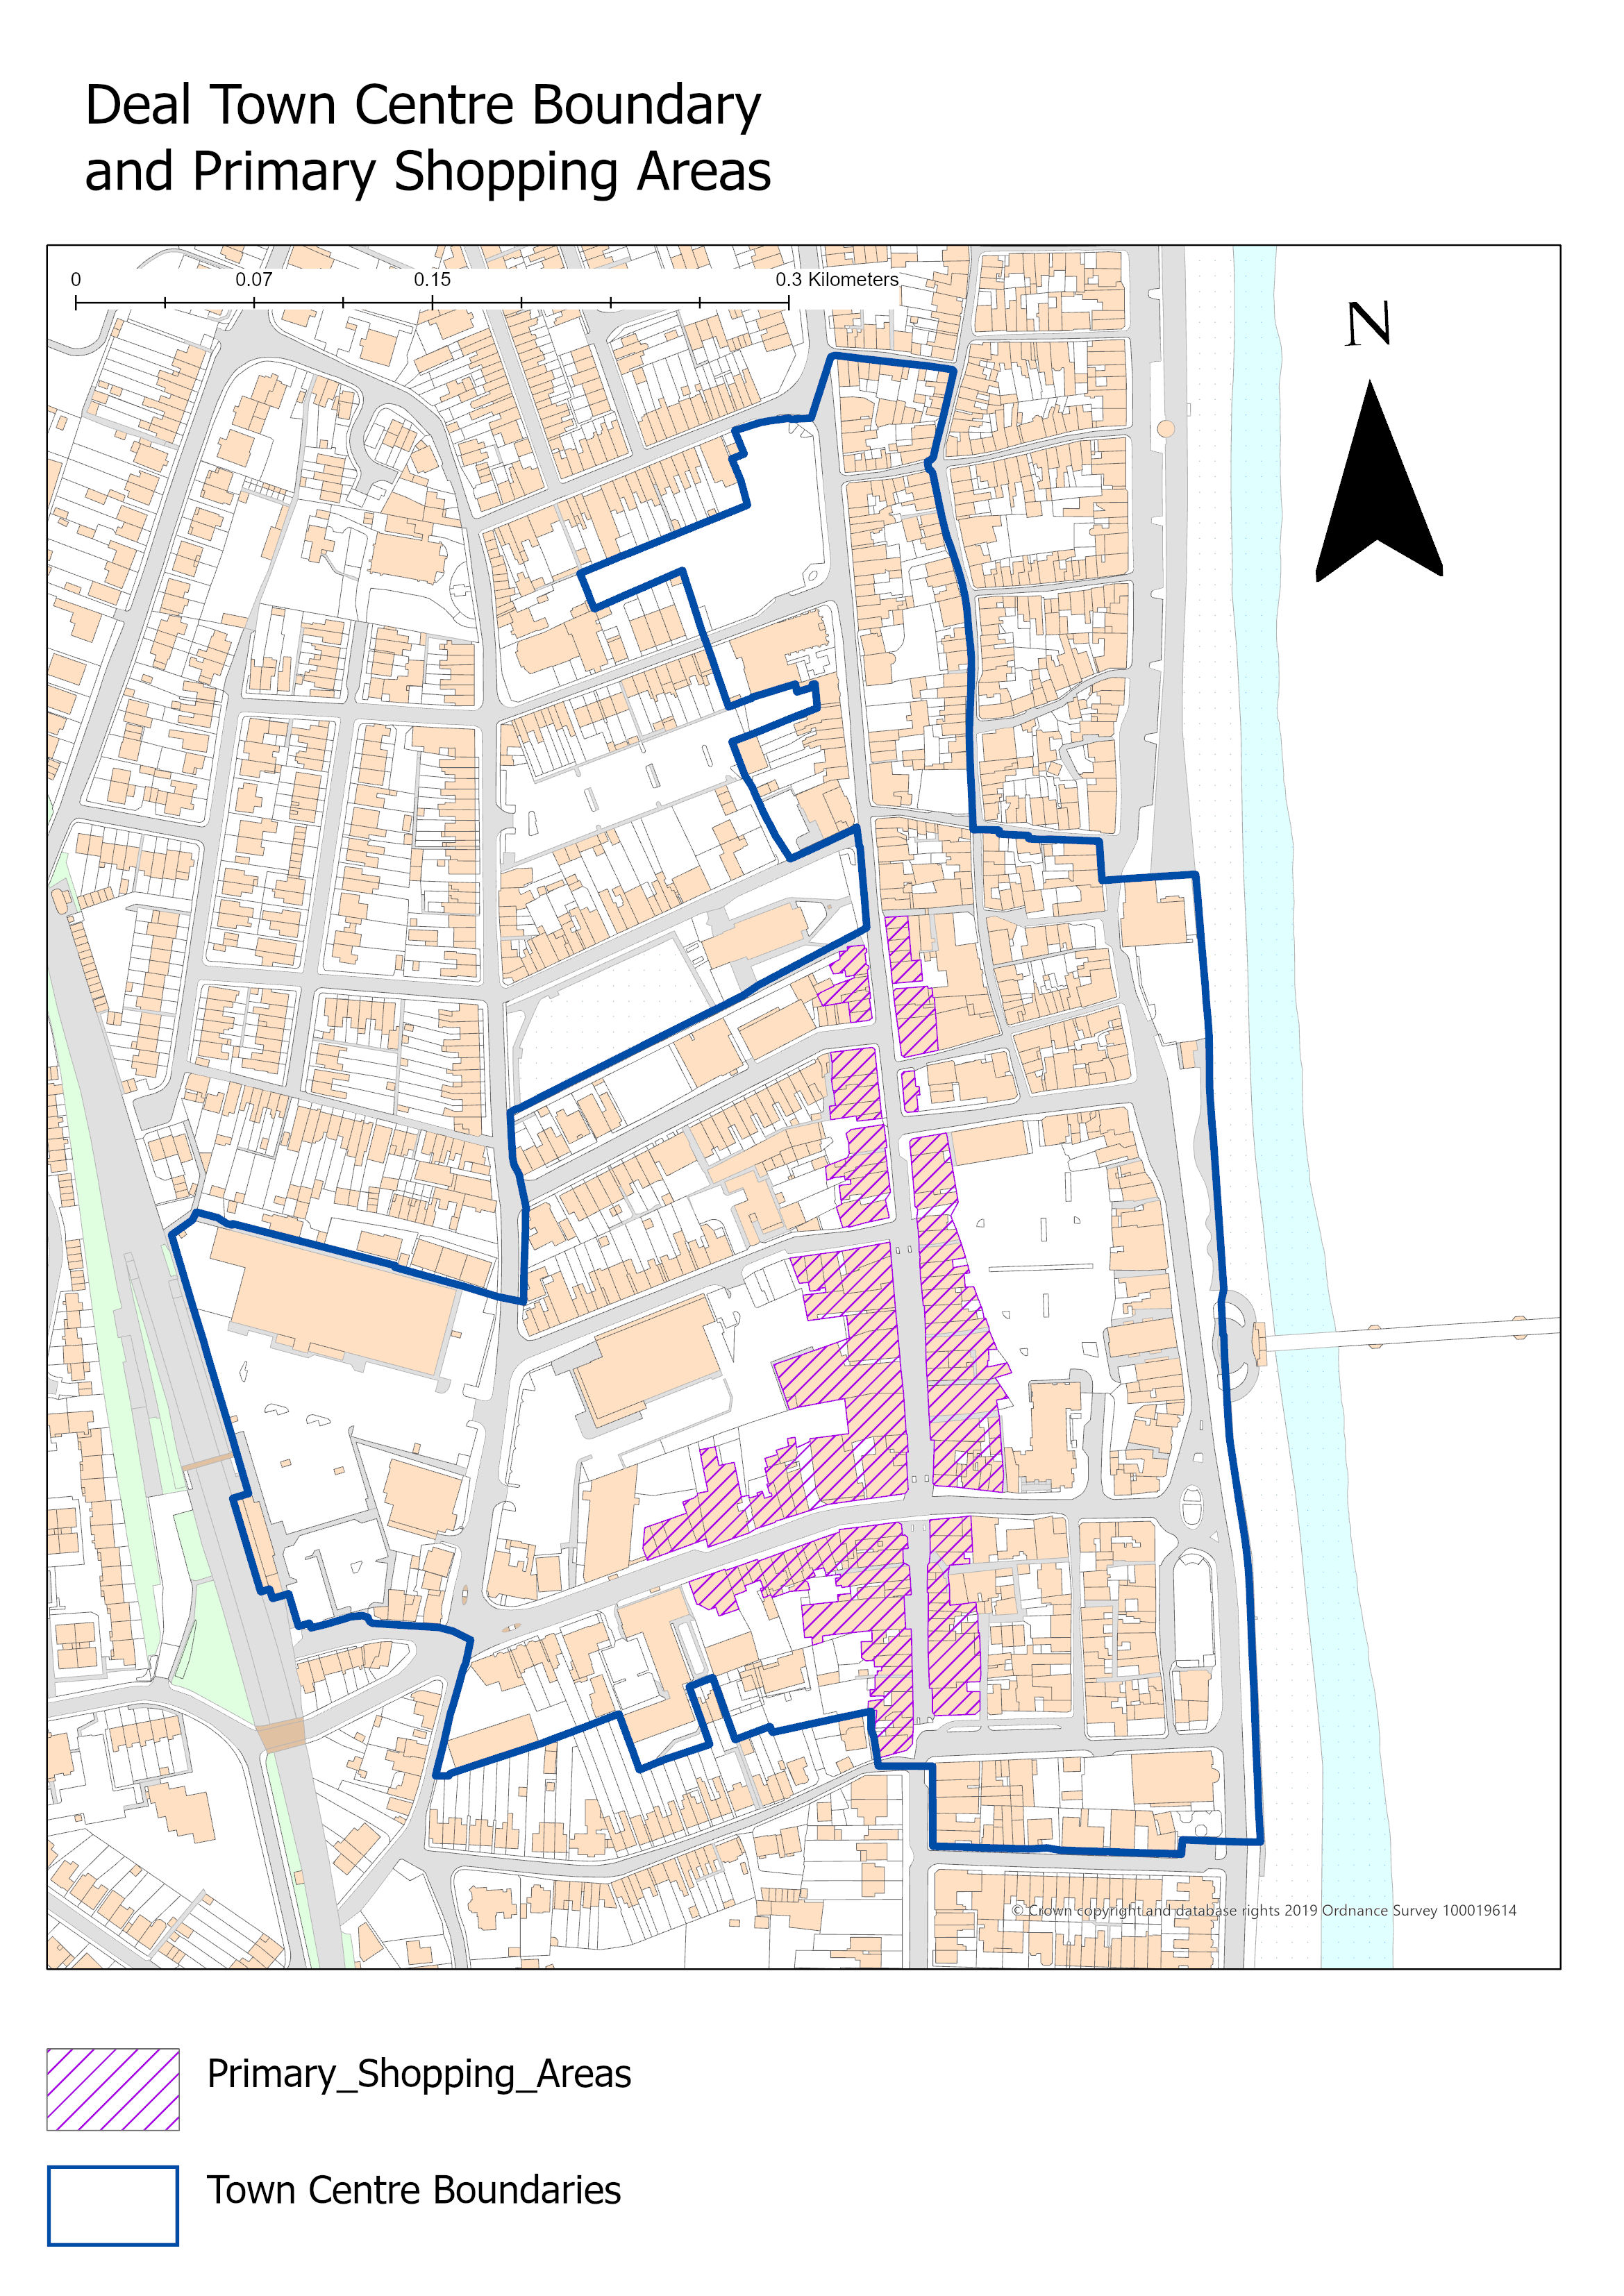 Deal Town Centre Primary Shopping Areas and Town Centre Boundaries